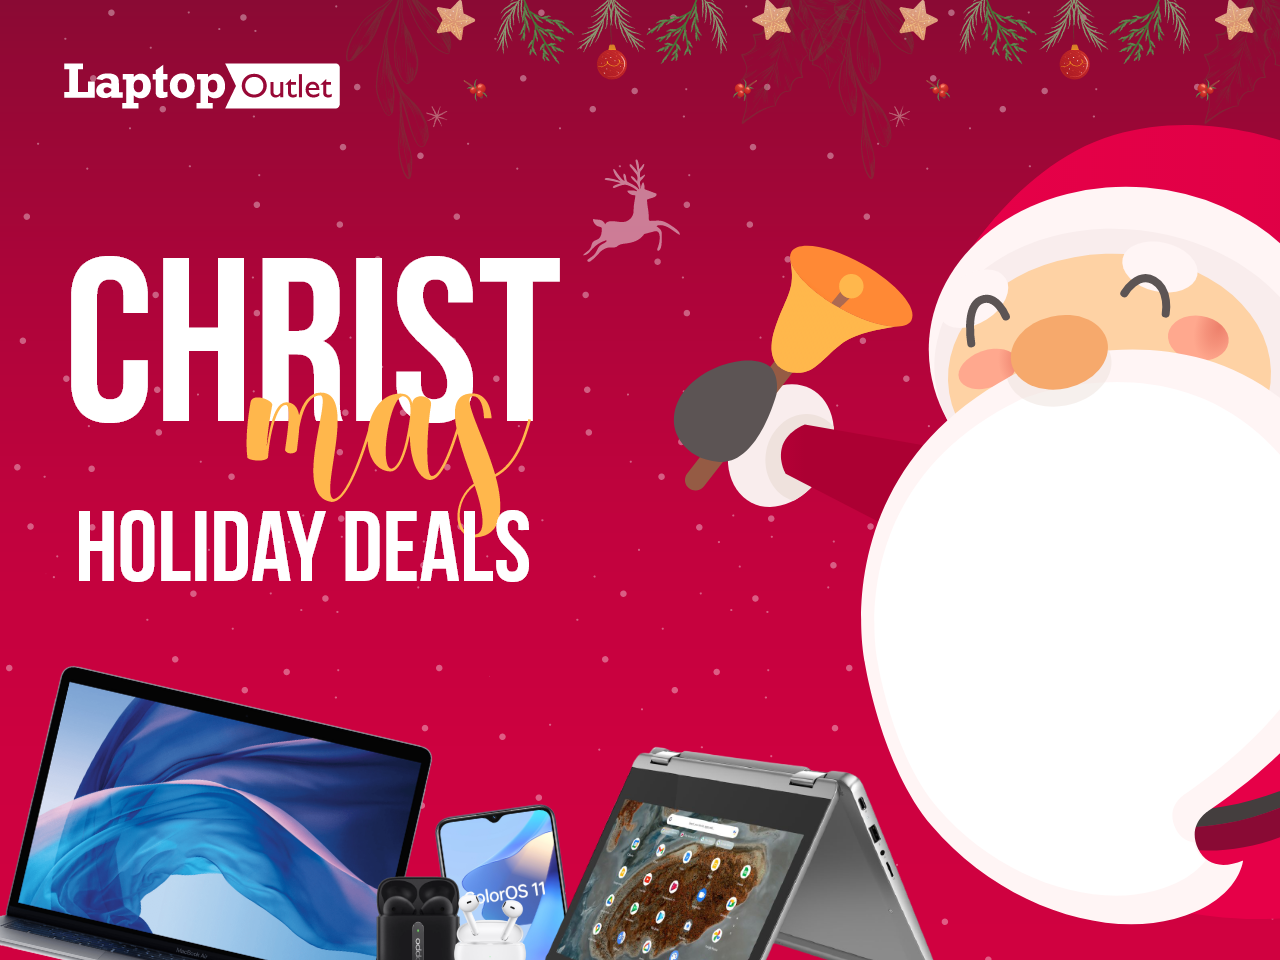 Laptop Outlet announces Christmas Holiday Deals featuring the latest brands including OPPO, ASUS, Medion, Acer and Lenovo